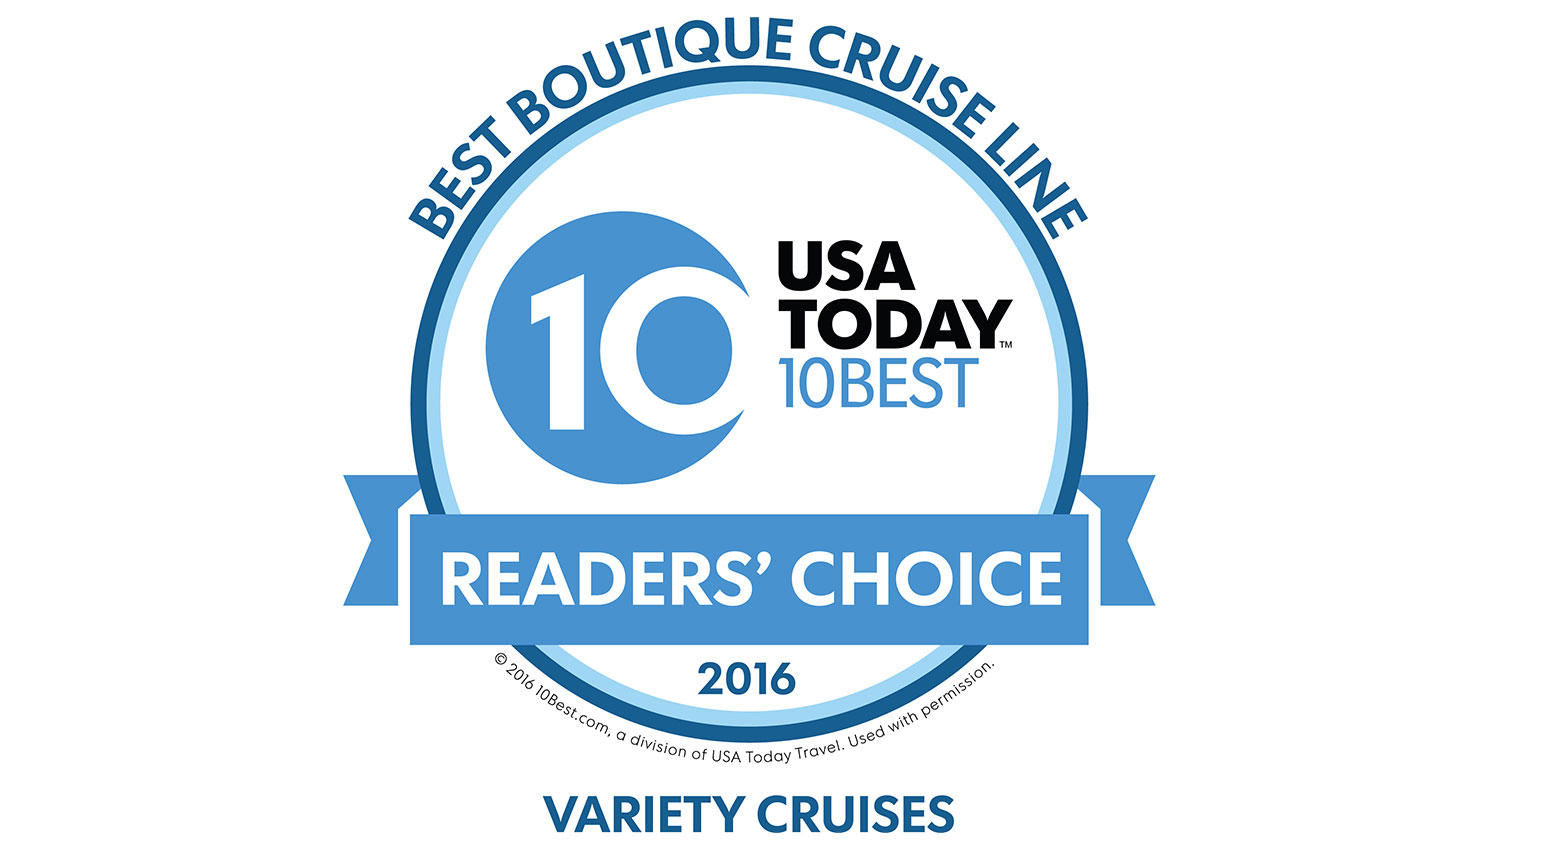 Variety Cruises named "Best Cruise Line" by USA Today in 2016